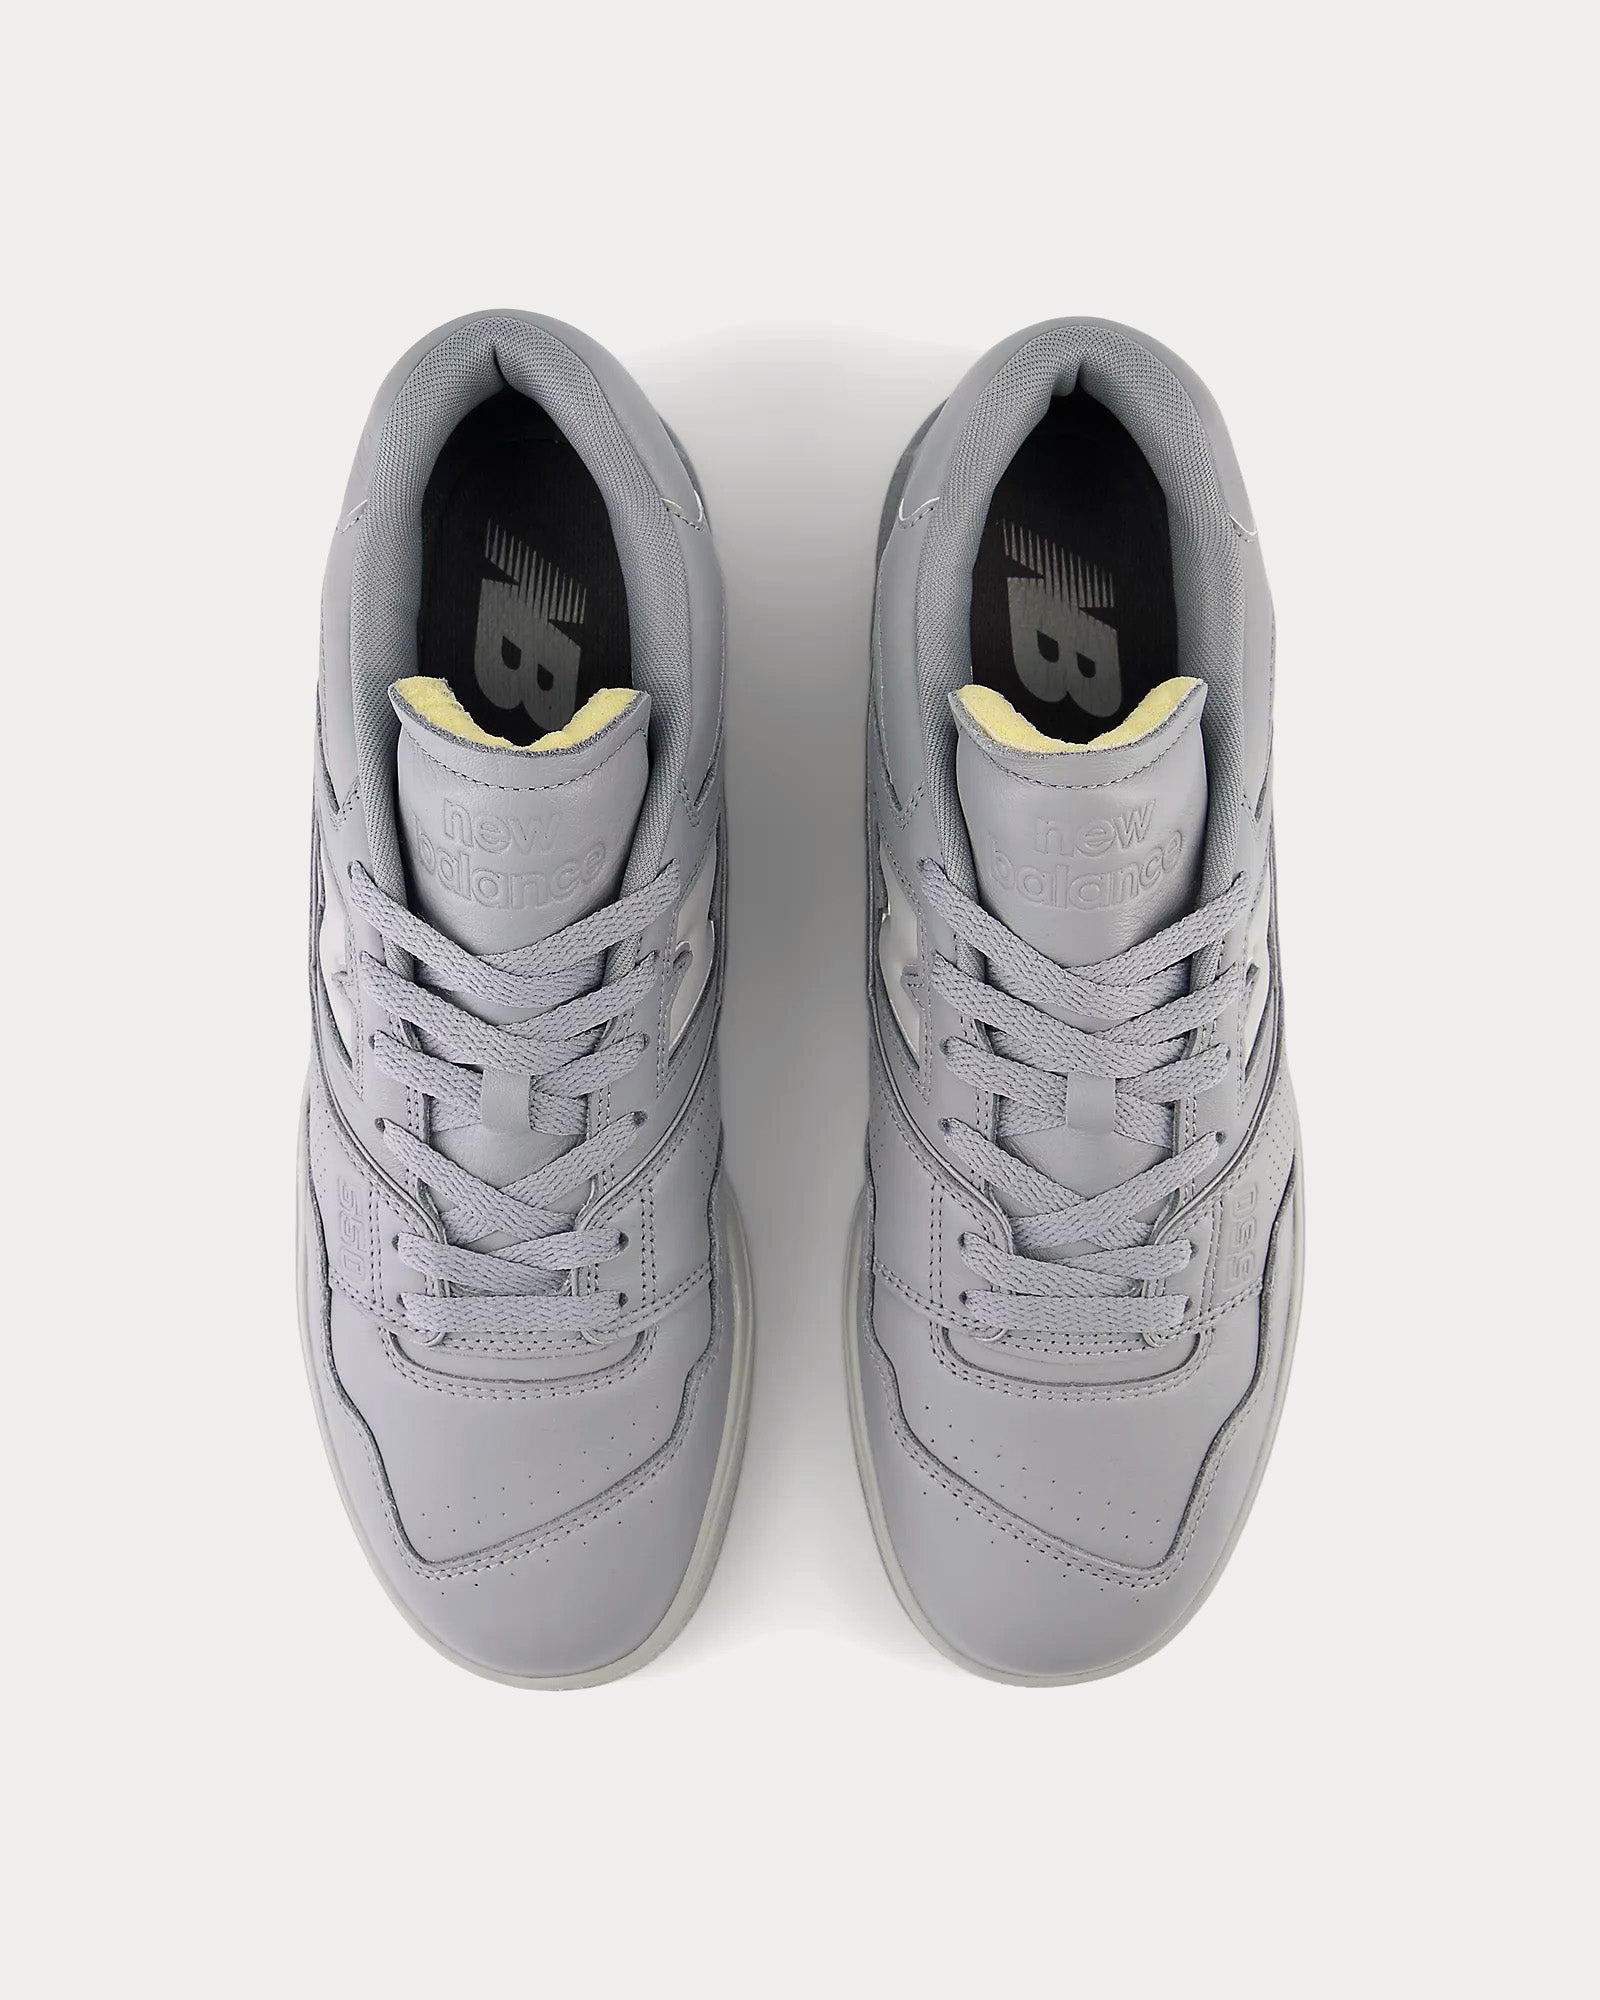 New Balance - 550 Slate Grey / Concrete Low Top Sneakers